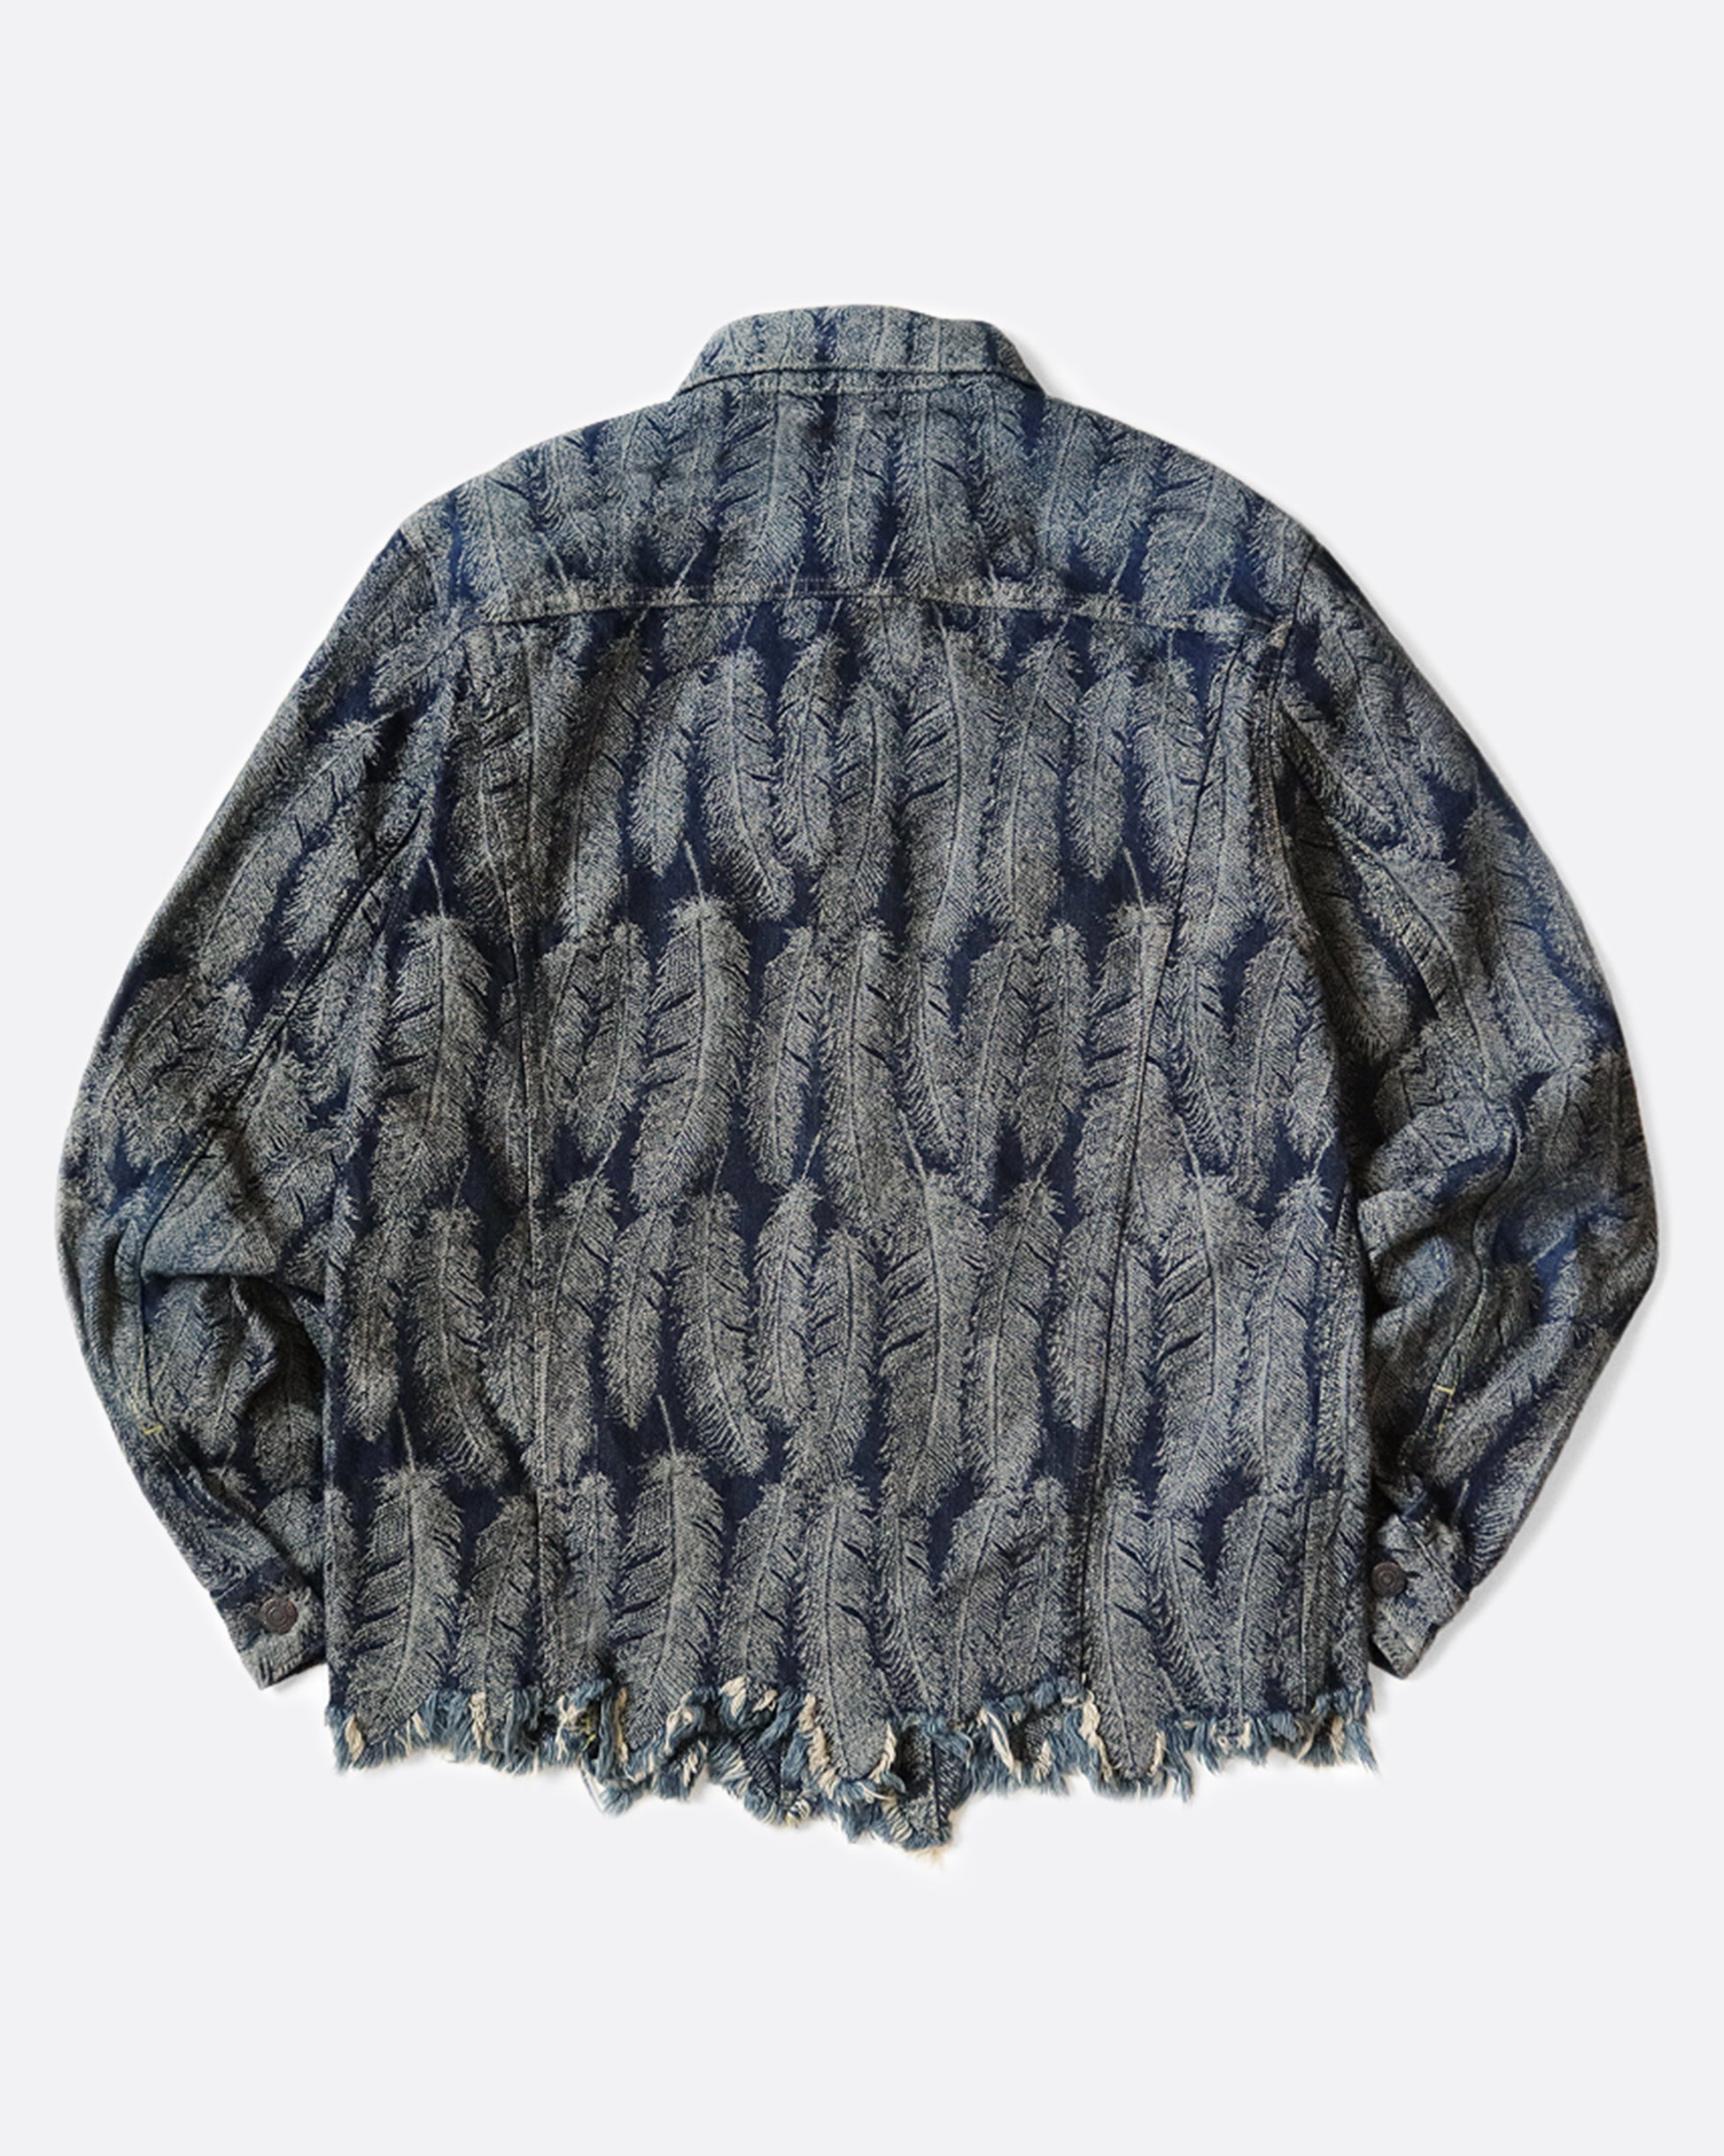 A Type III jacket made from denim jacquard with a 3D luxurious feather pattern and a fringy hem.